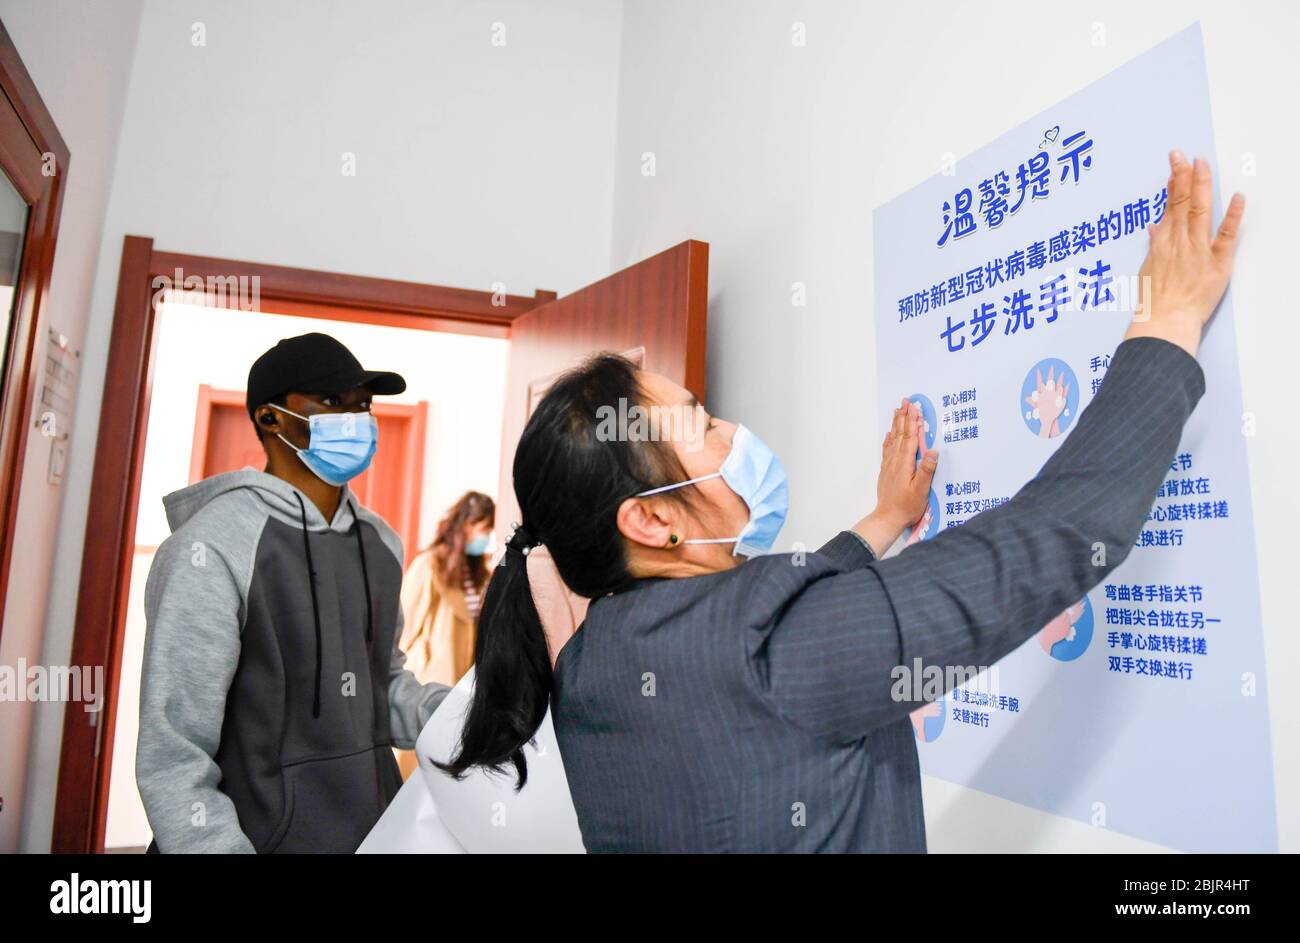 (200430) -- CHANGCHUN, April 30, 2020 (Xinhua) -- Mustapha (L) helps a teacher to post anti-epidemic poster in Changchun University of Chinese Medicine in Changchun, northeast China's Jilin Province, April 27, 2020. Mustapha Abdul Raheem has experienced two epidemics in the past six years: one was the Ebola in West Africa in 2014, during which he witnessed sufferings and aspired to study medicine; the other was the COVID-19. This time as a medical student in China, he was better prepared, both professionally and mentally. TO GO WITH 'Feature: An African medical student's fight against COVID-19 Stock Photo